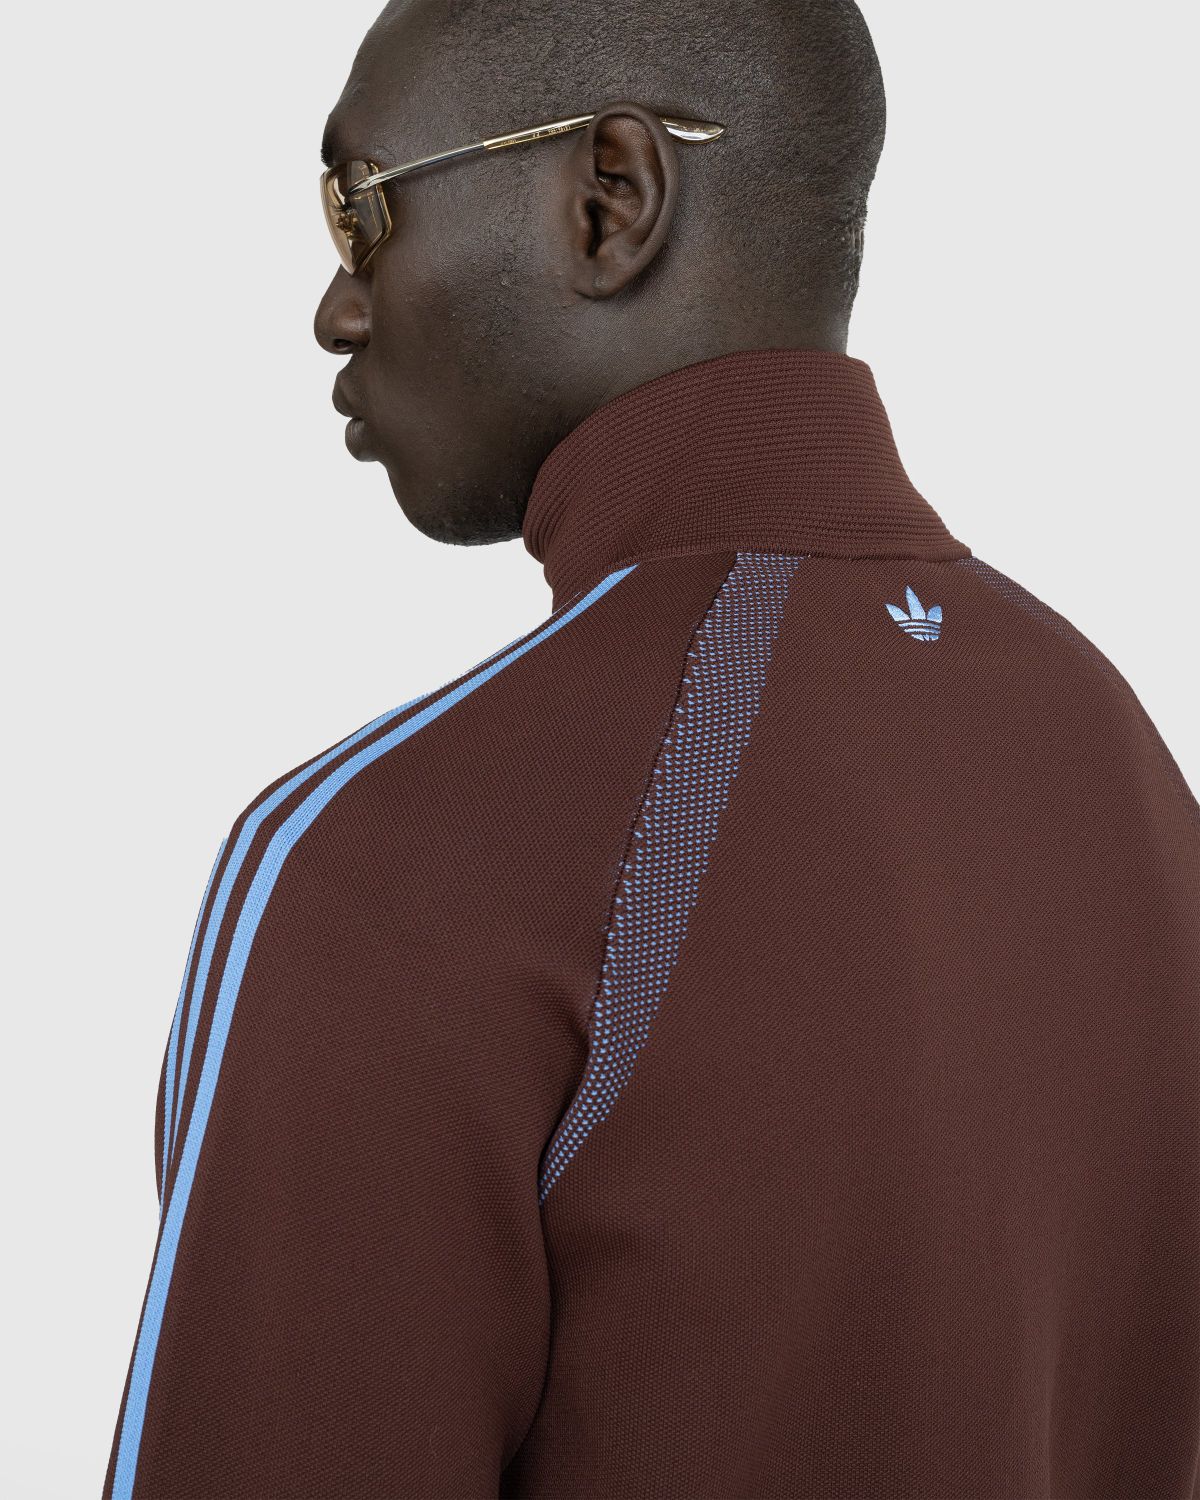 Adidas x Wales Bonner – Knit Track Top Mystery Brown - Tops - Brown - Image 5